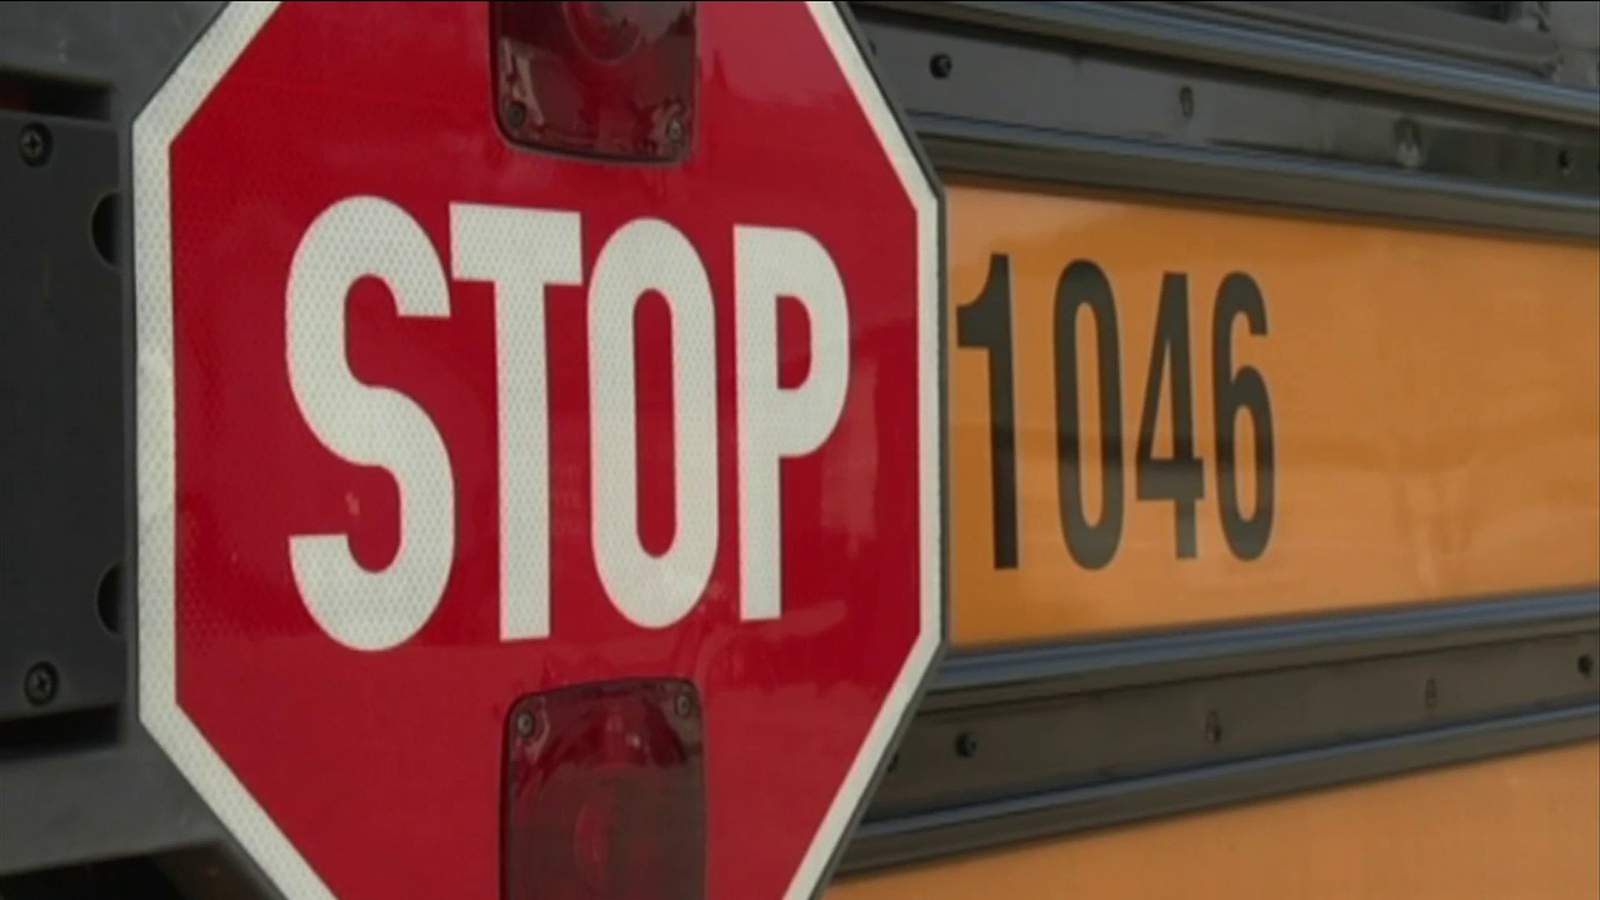 Transportation will present challenge during Duval County school reopening